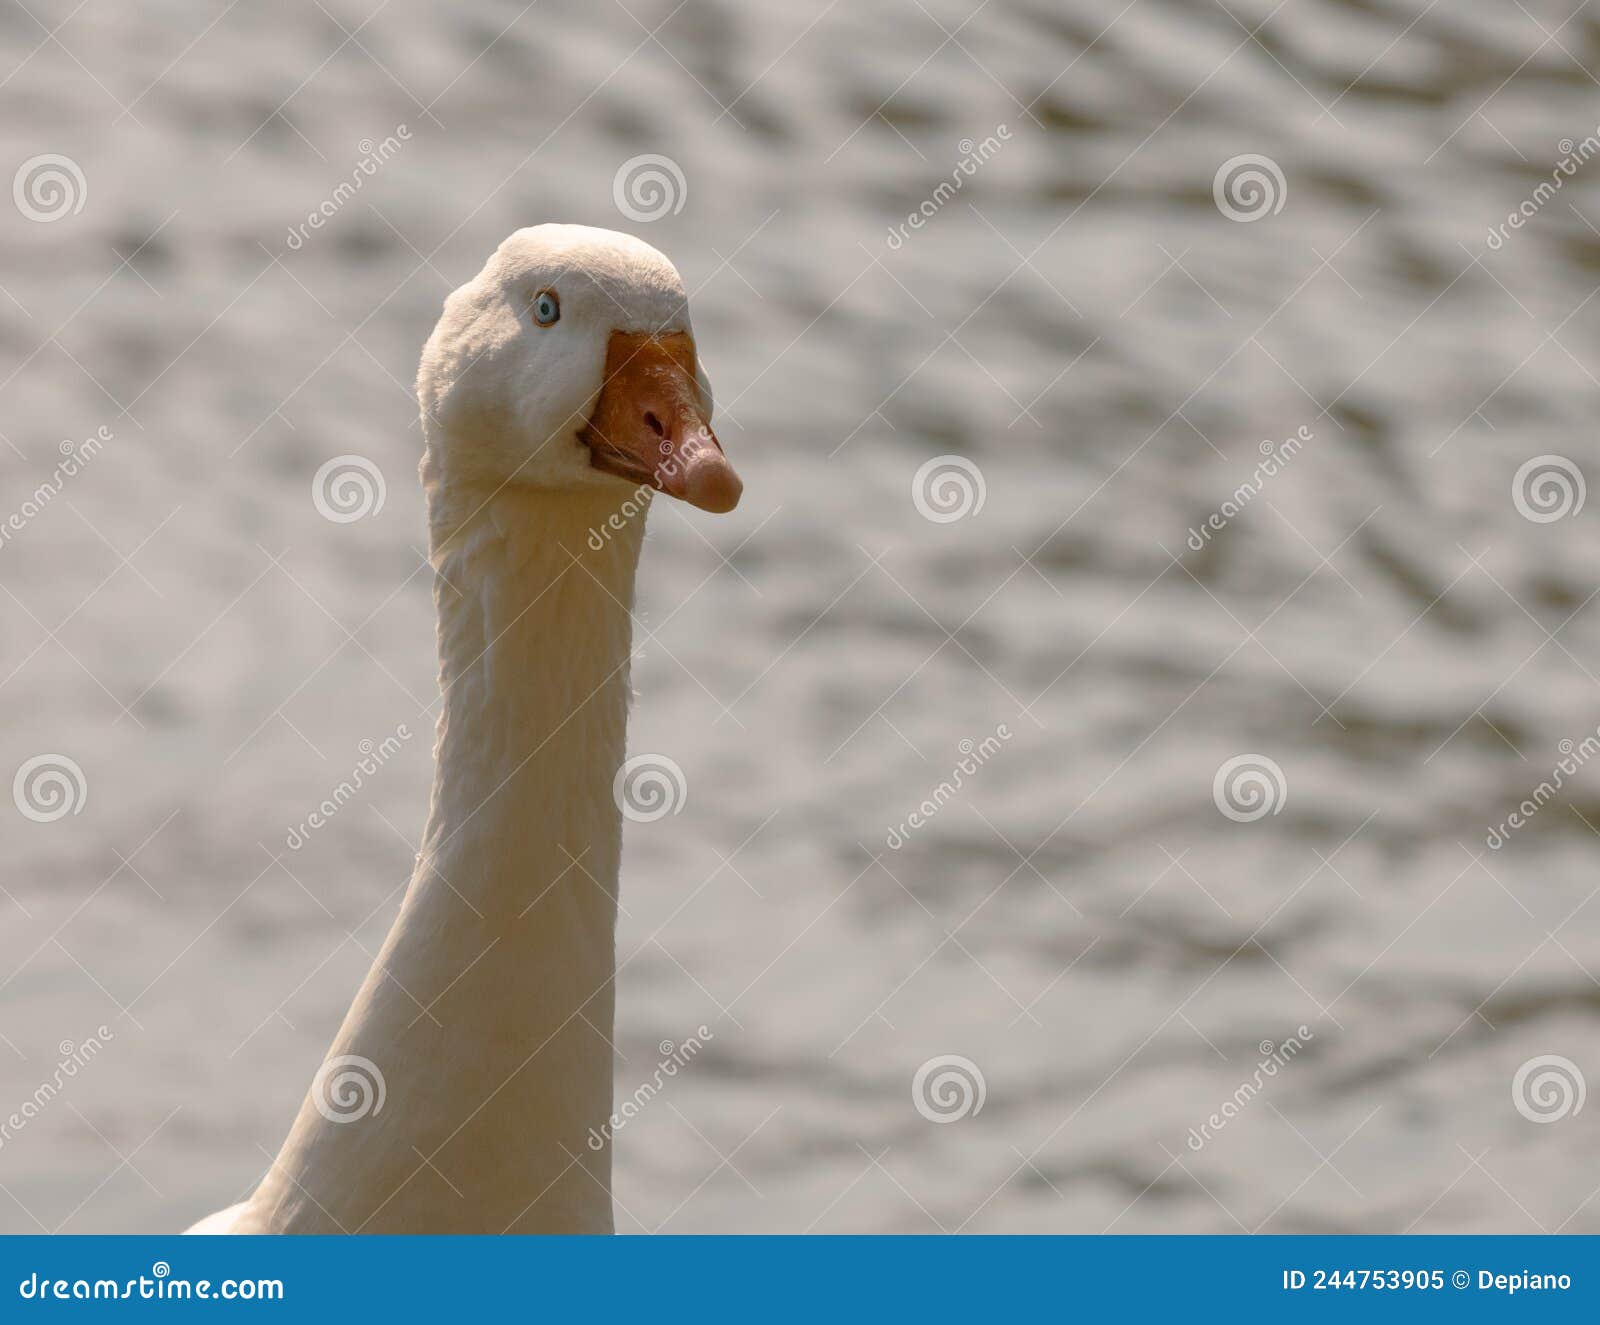 emden goose on a sunny day. portrait of domestic white goose